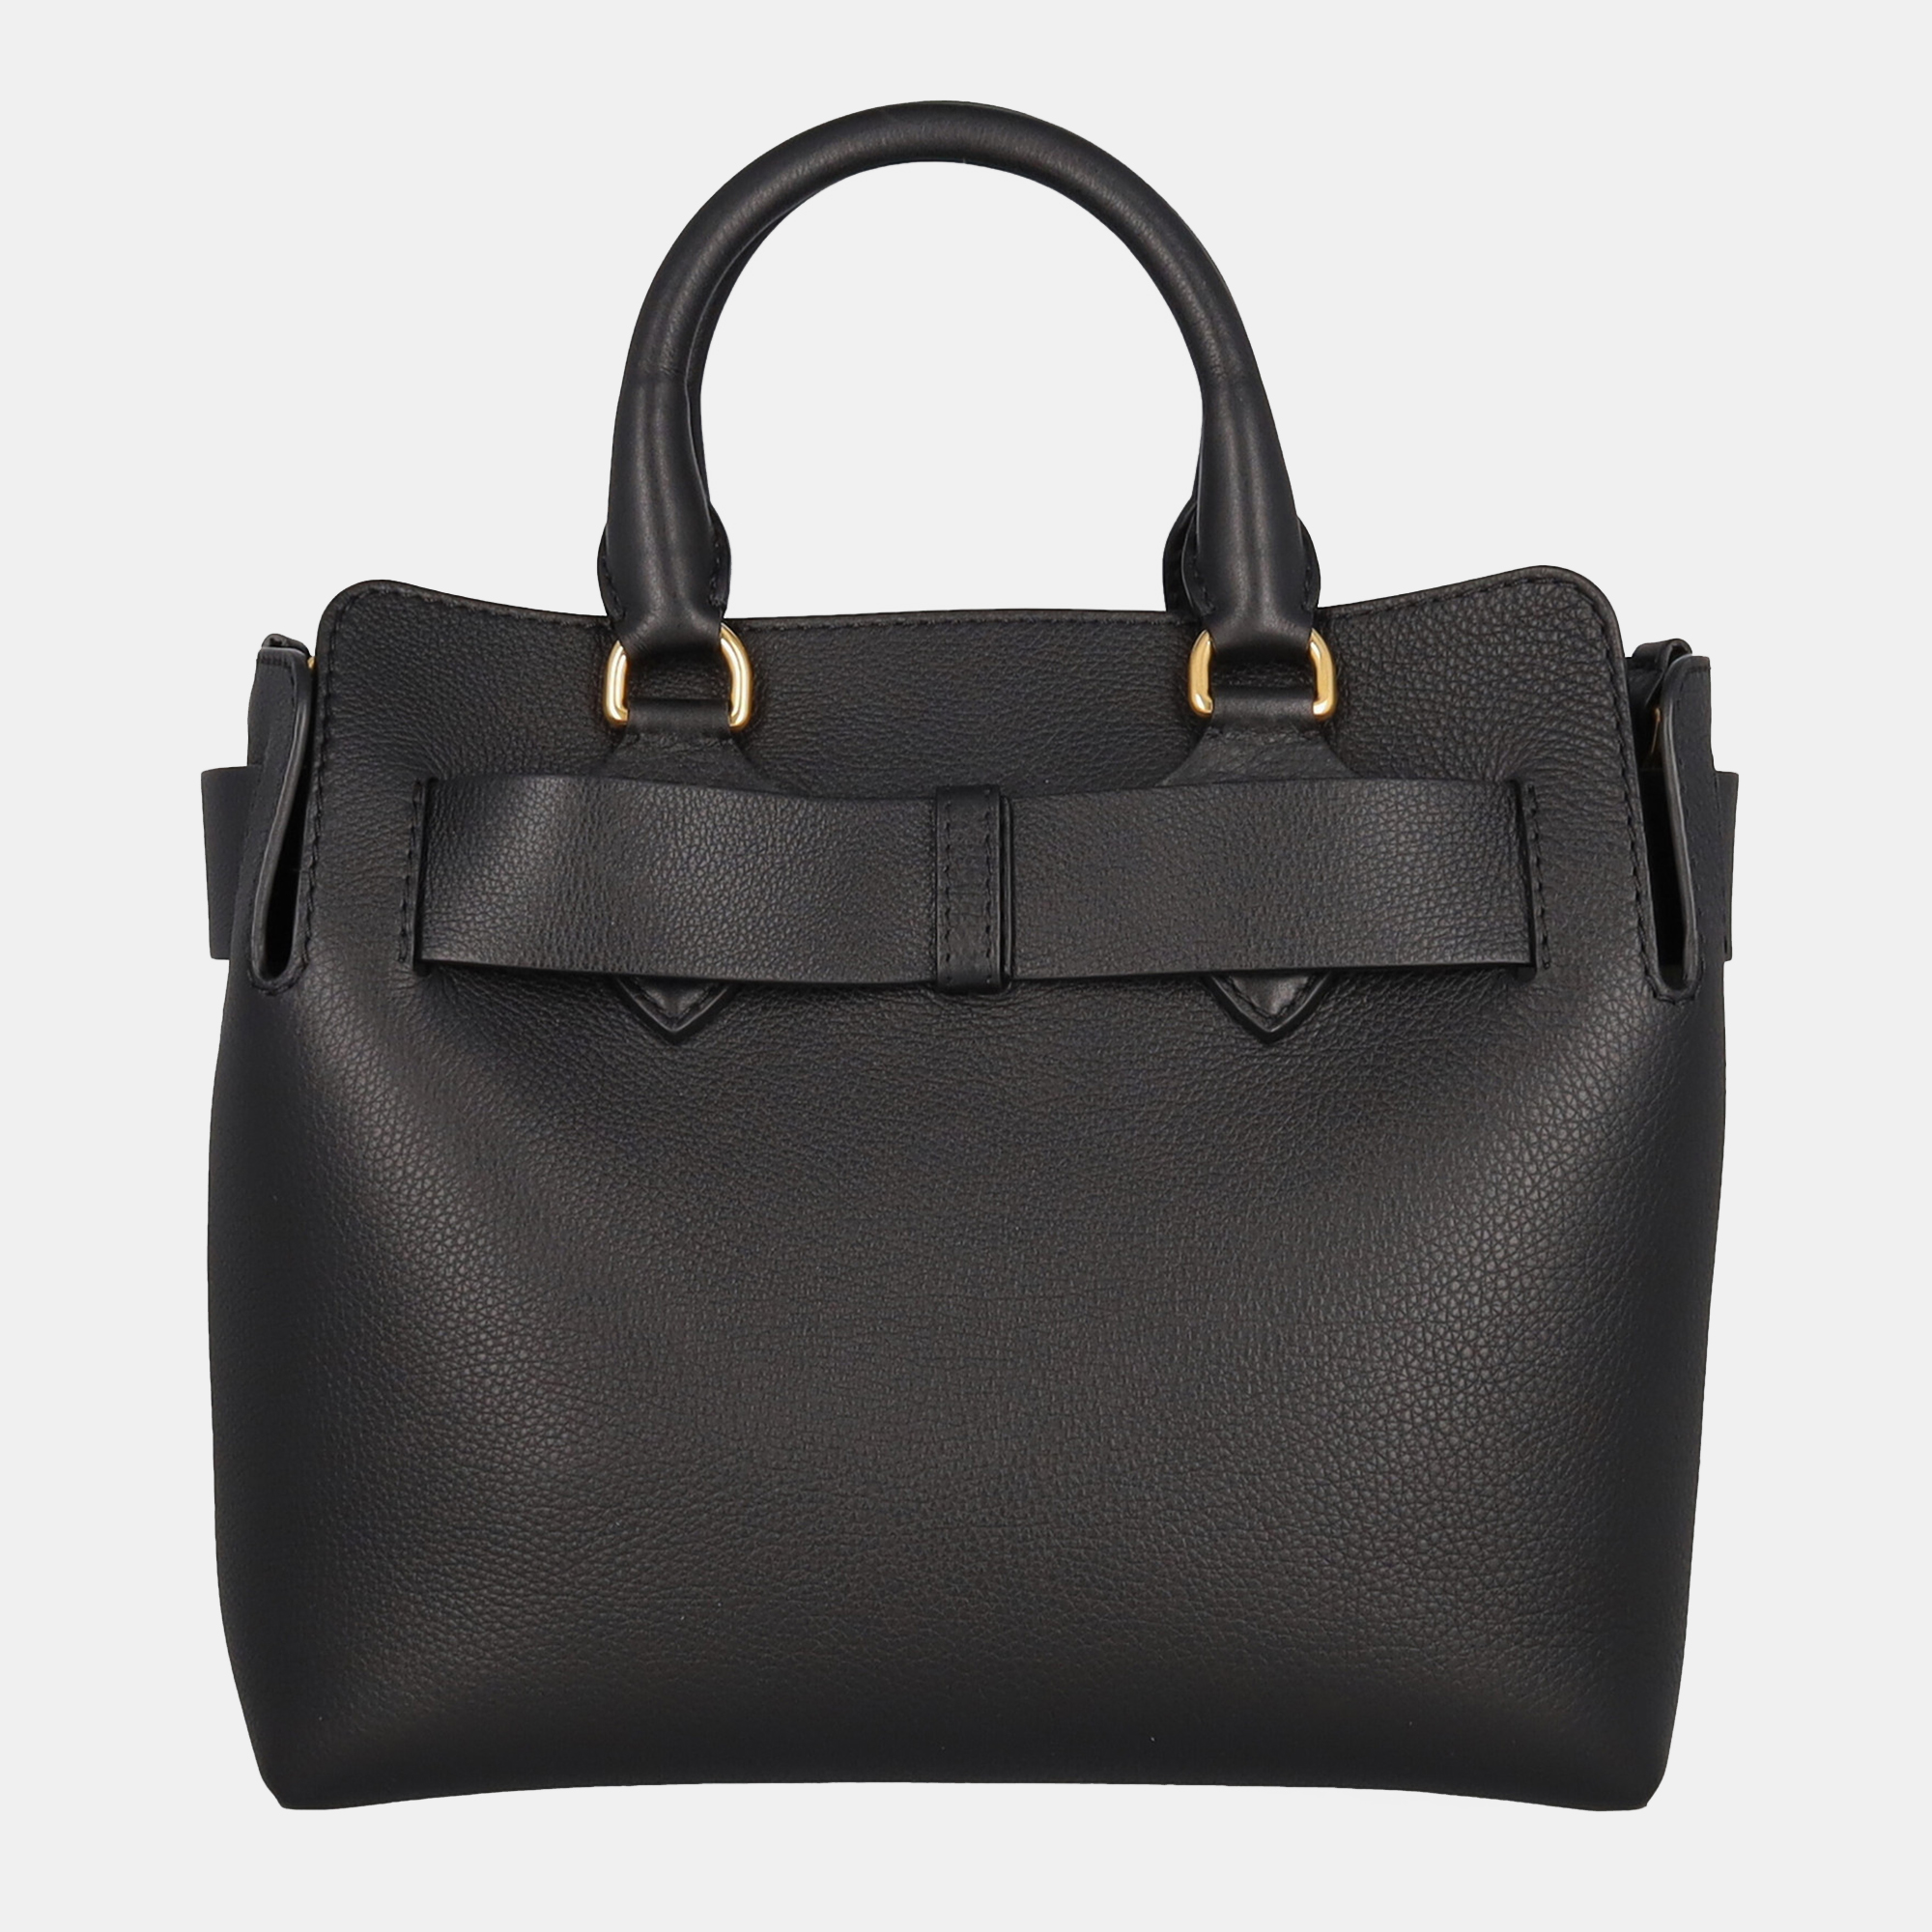 Burberry Women's Leather Tote Bag - Black - One Size